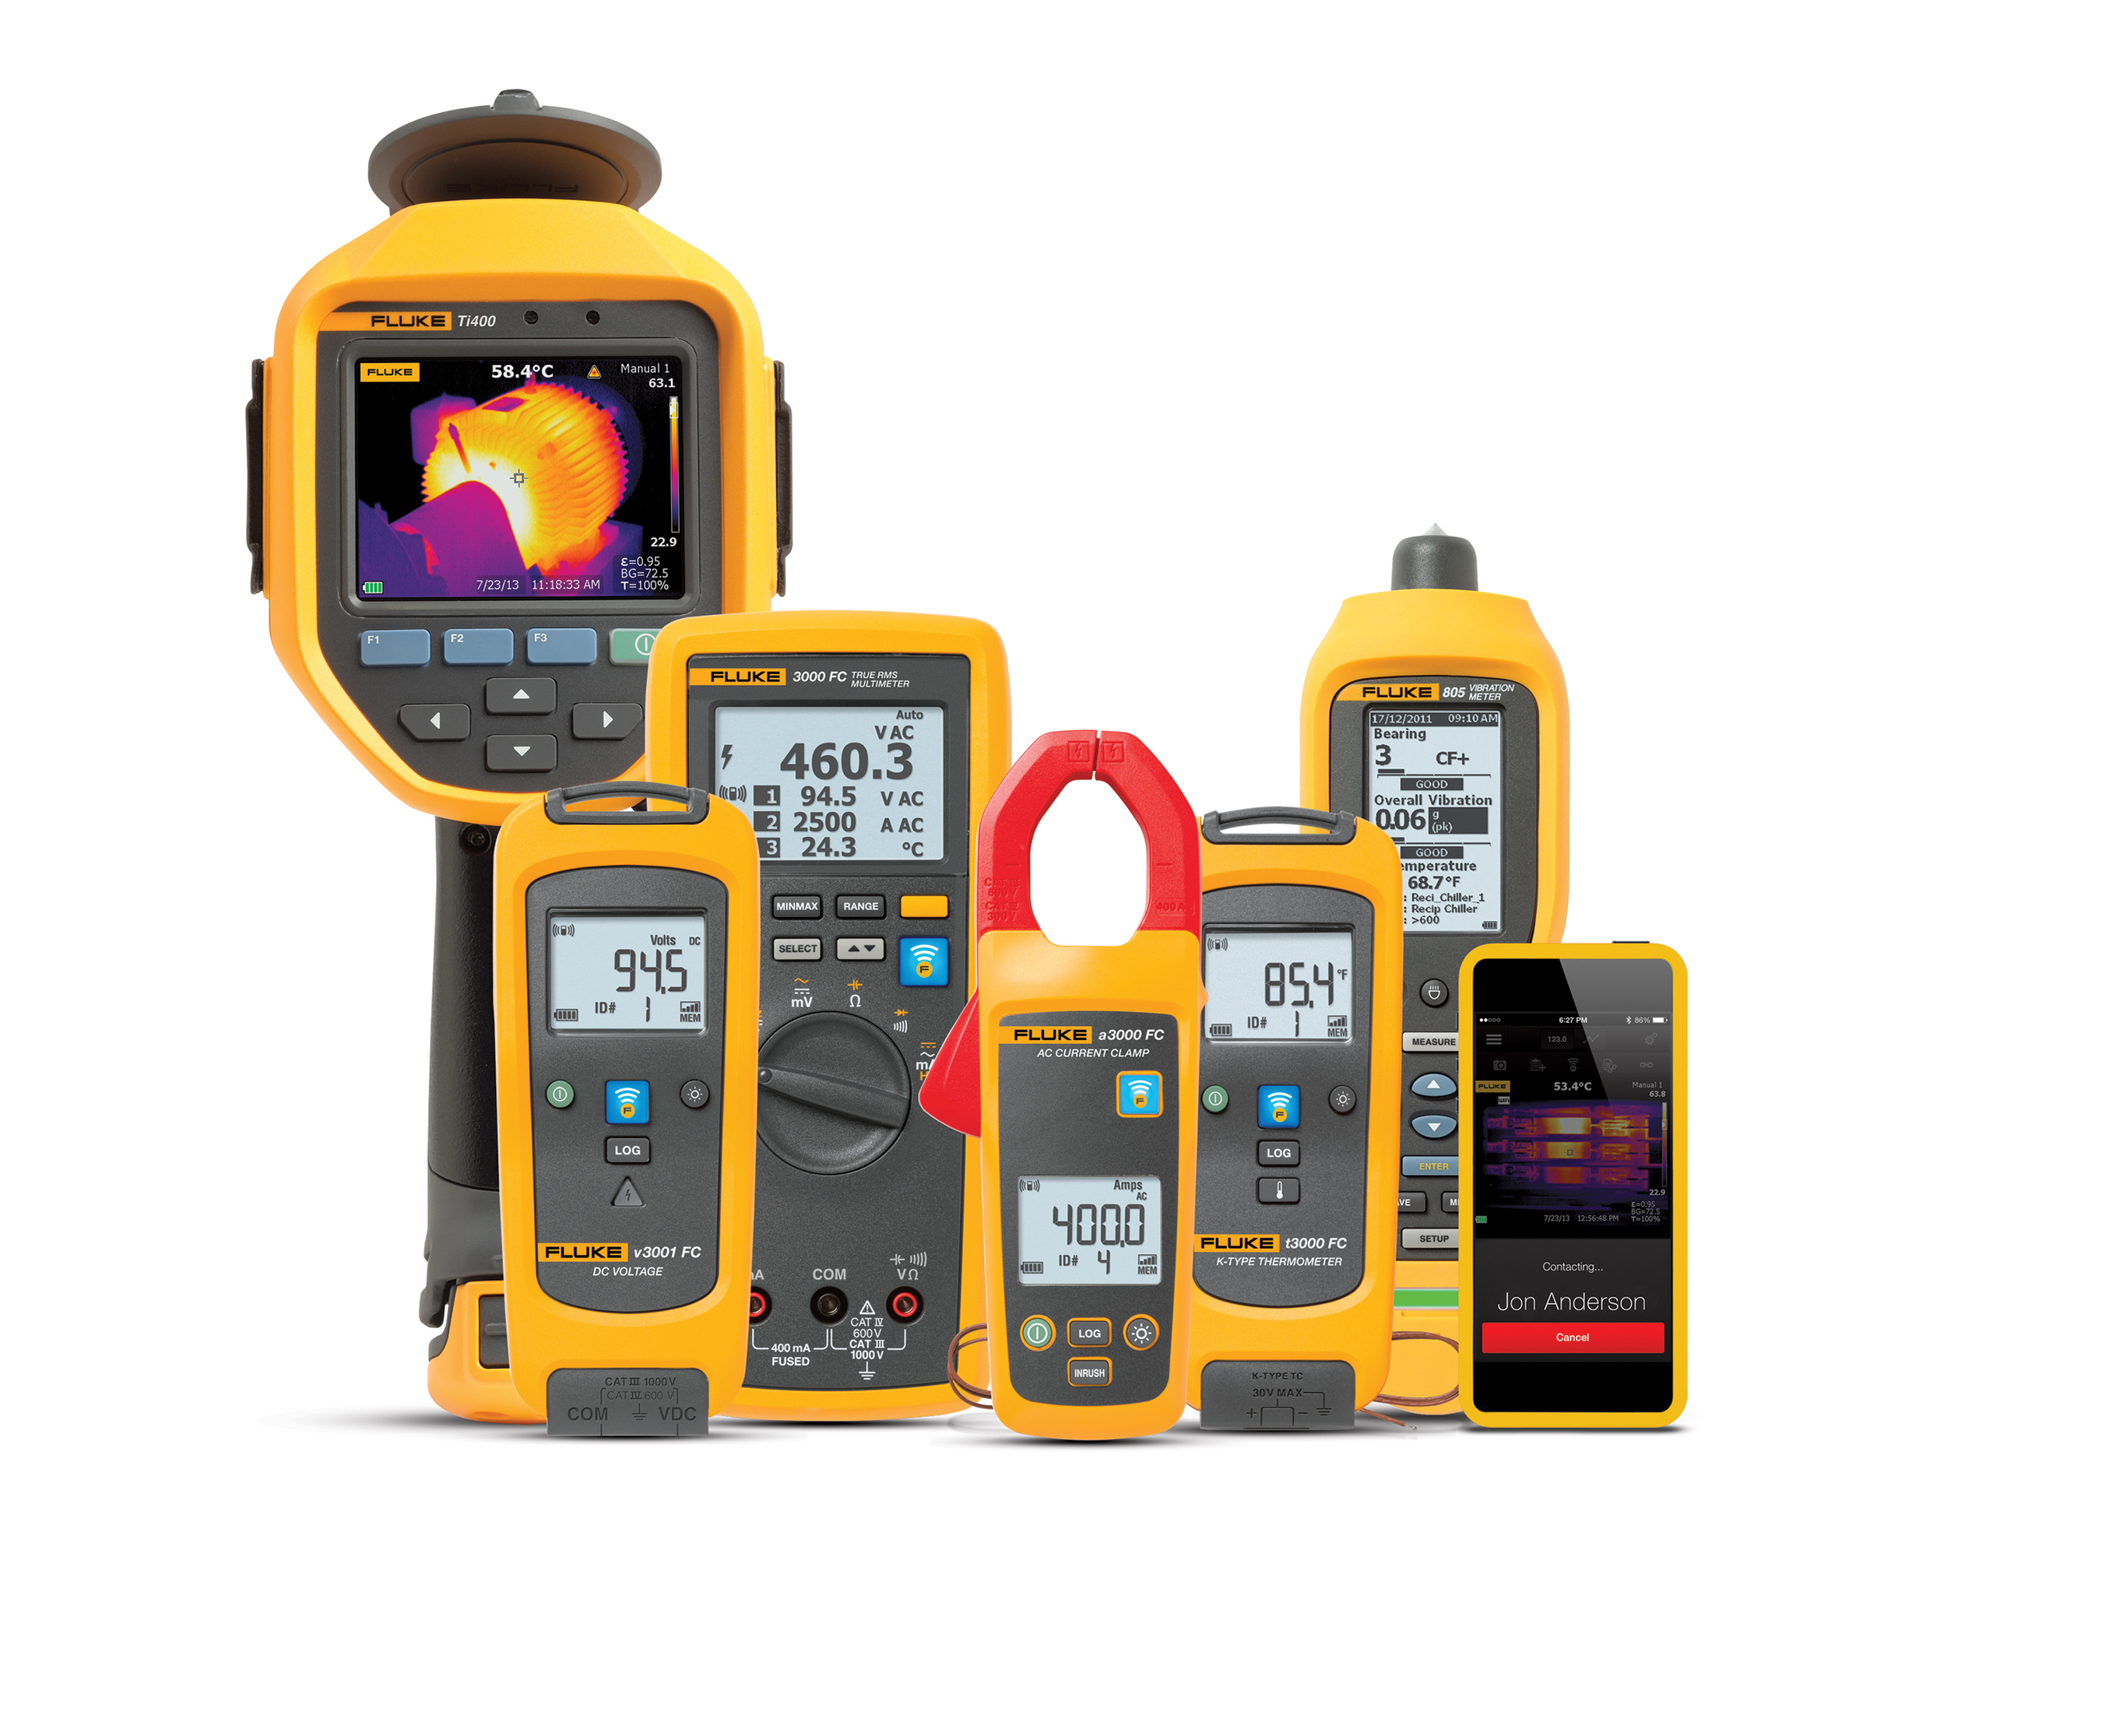 Fluke Connect(TM) will be presented with the top honor in the Innovation Awards software category this week at AHR Expo held at McCormick Place in Chicago. The full Fluke Connect system will be on display in the Fluke booth, demonstrating how it speeds the inspection of HVAC/R and electrical systems to keep them operating at peak efficiency.